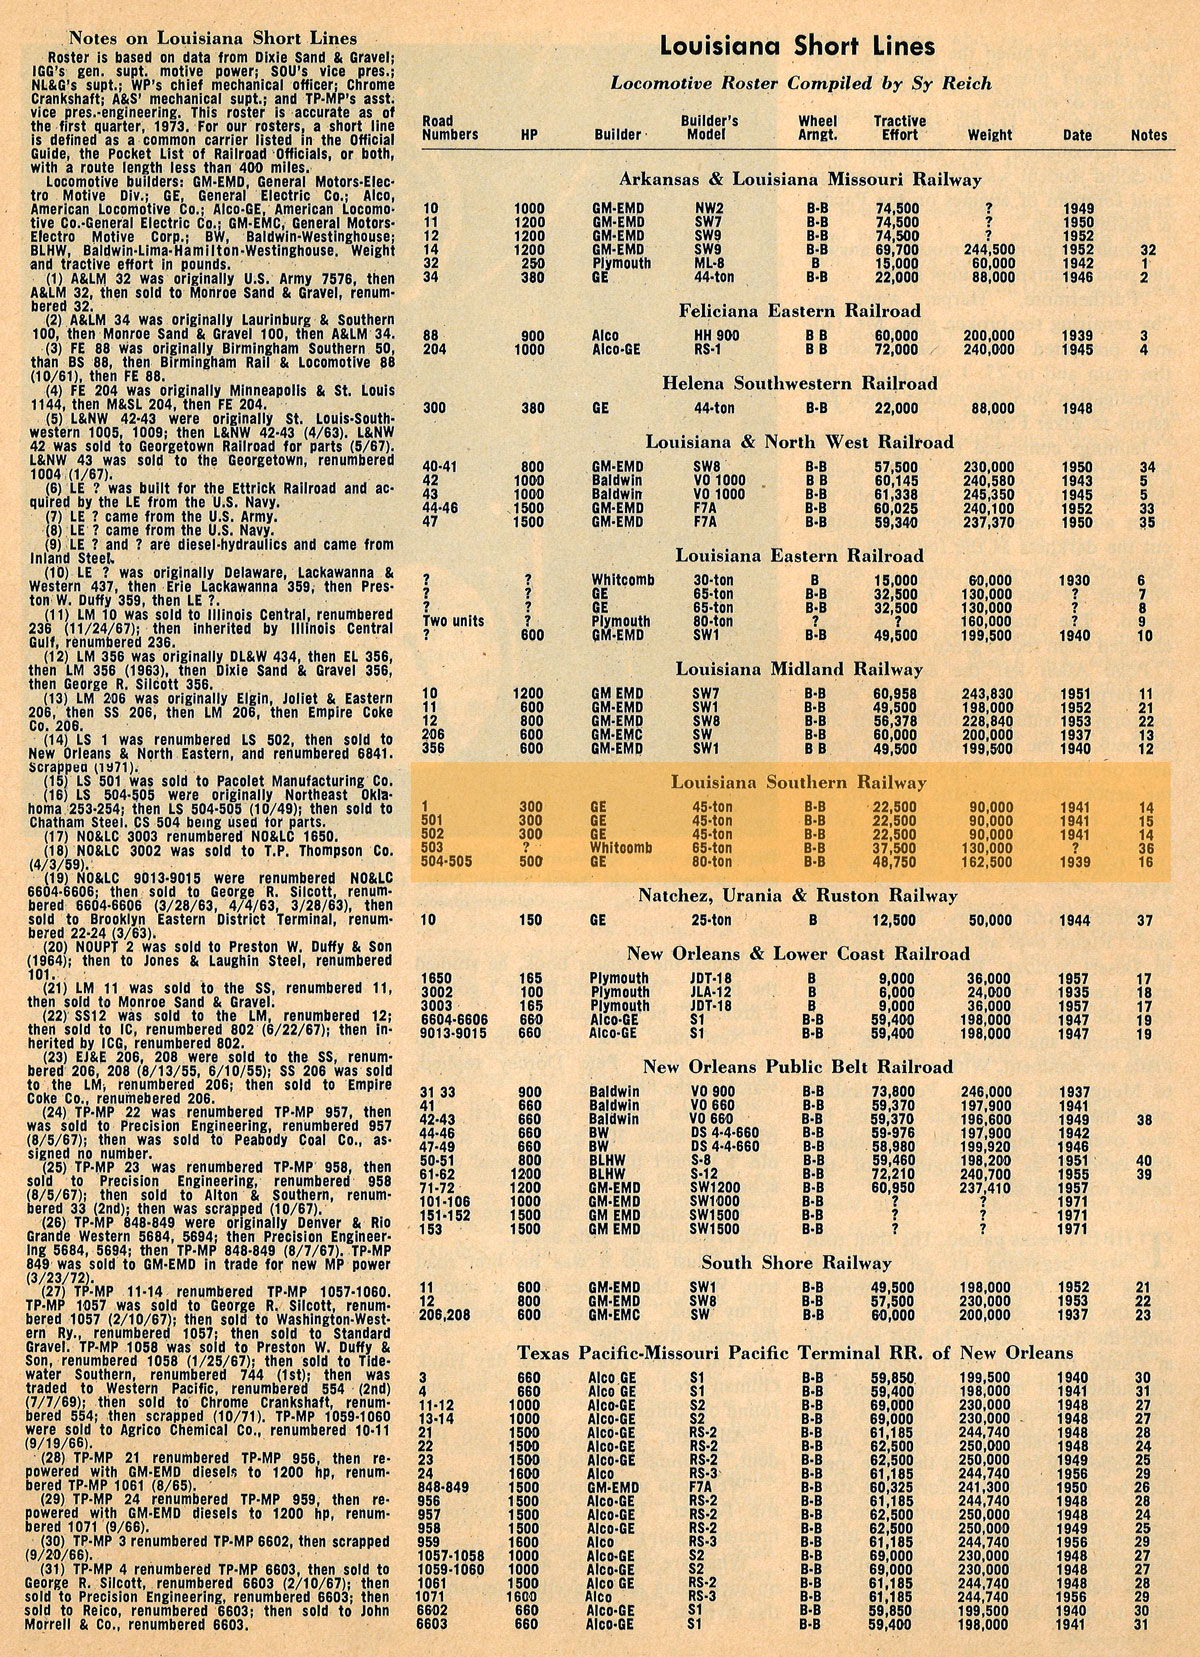 las_roster_clipping1973